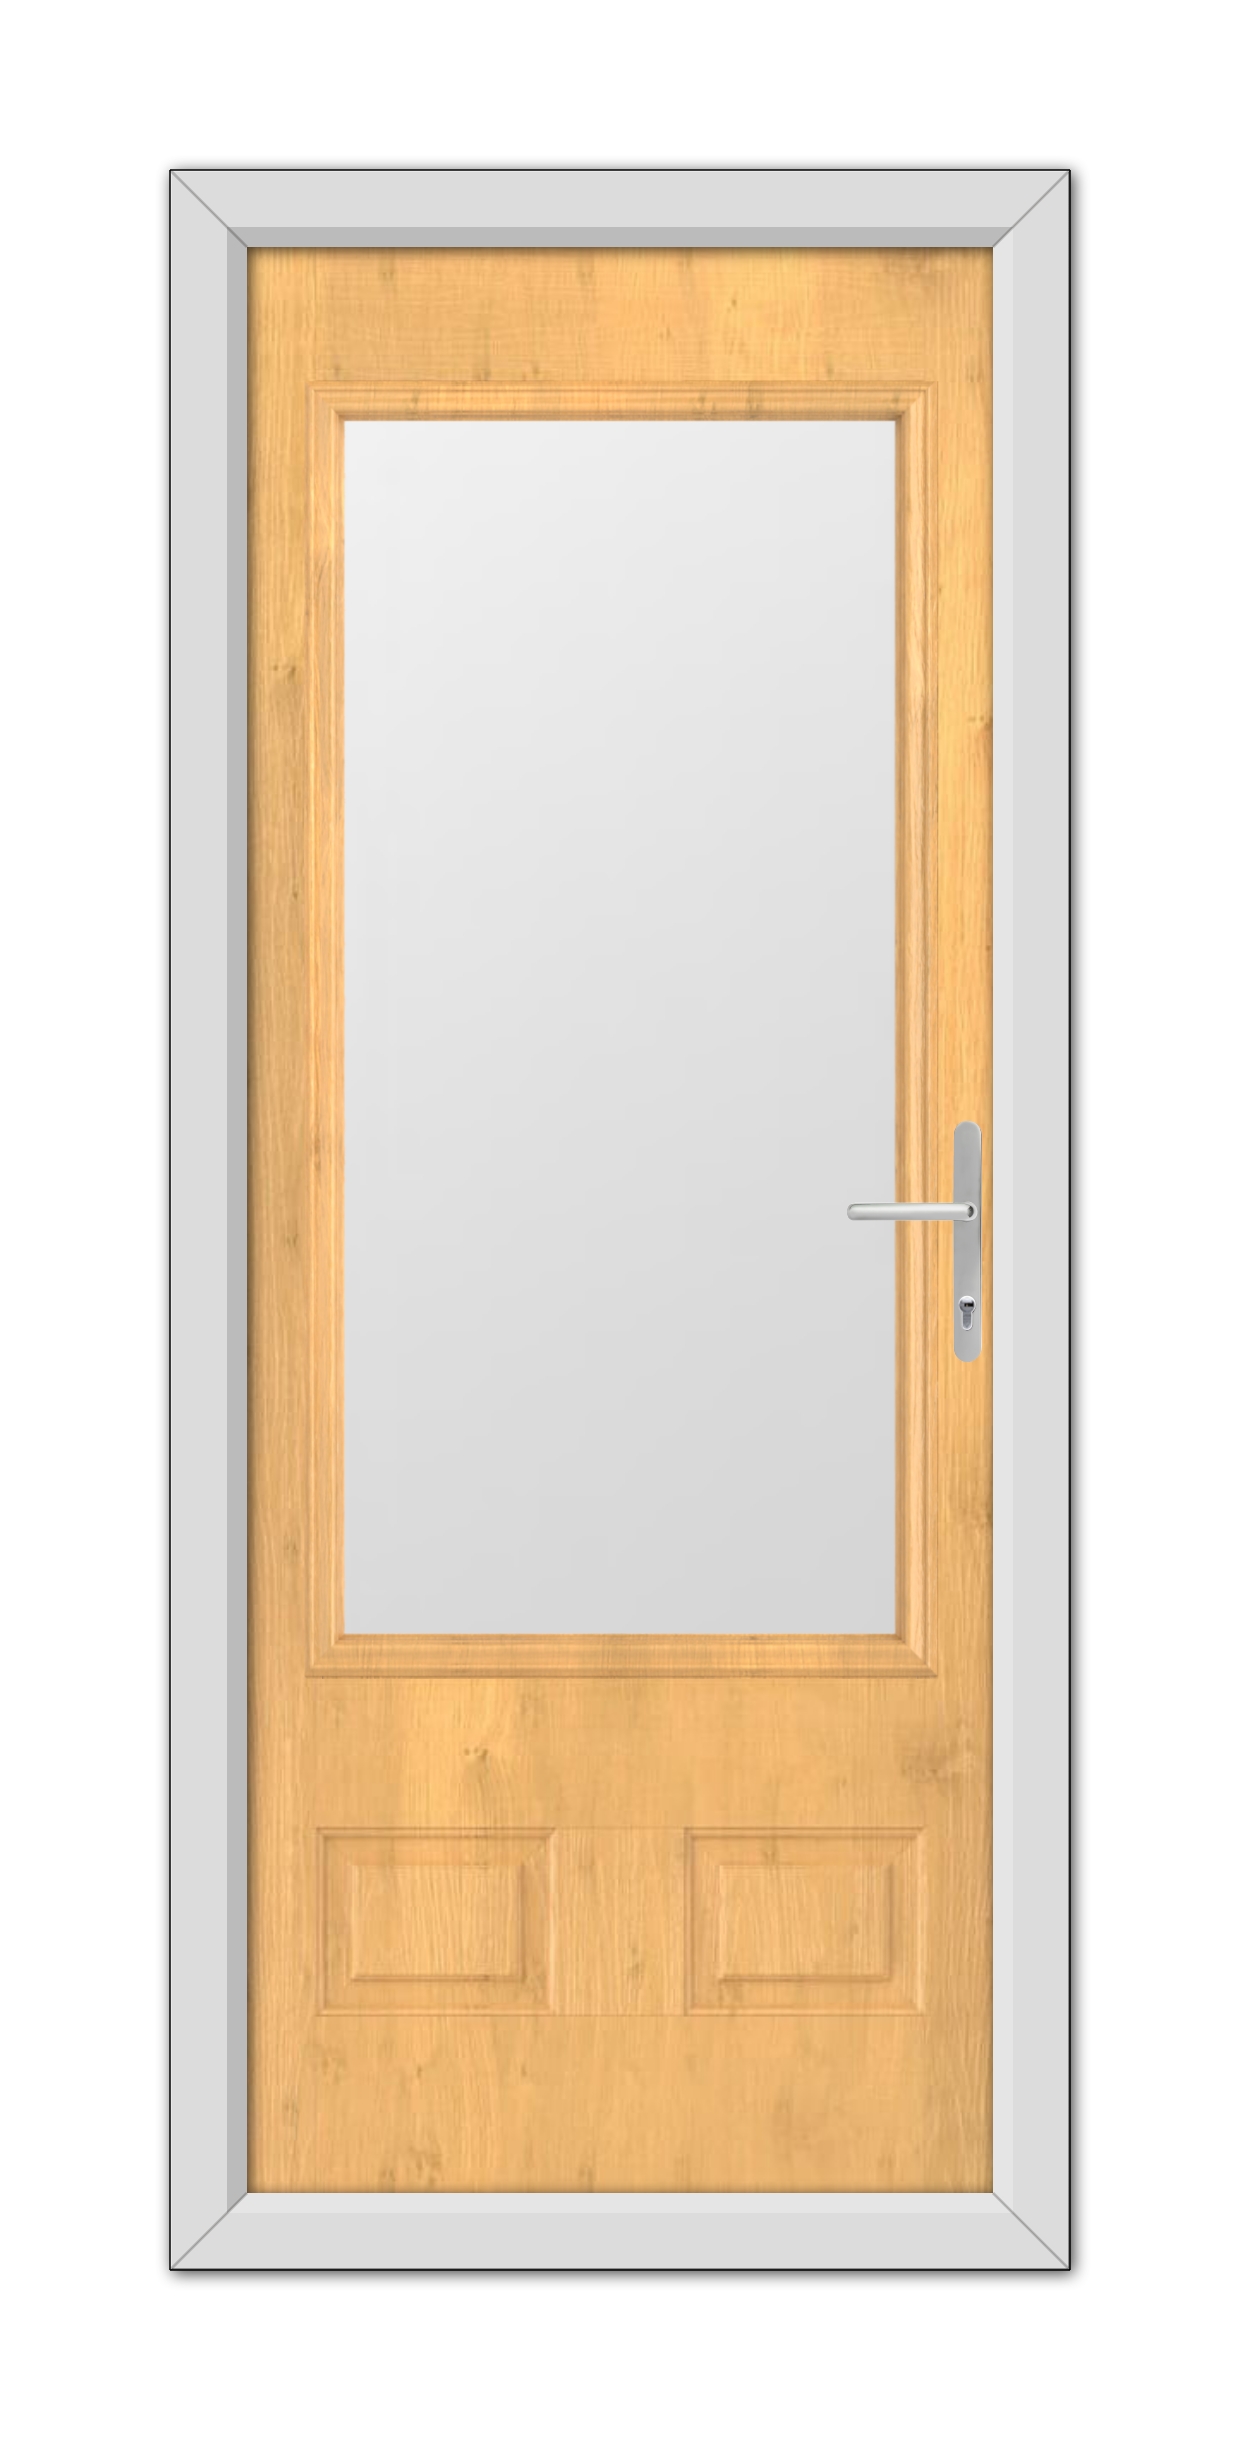 An Irish Oak Walcot Composite Door 48mm Timber Core with a vertical glass panel, framed in white, featuring a modern steel handle on the right side.